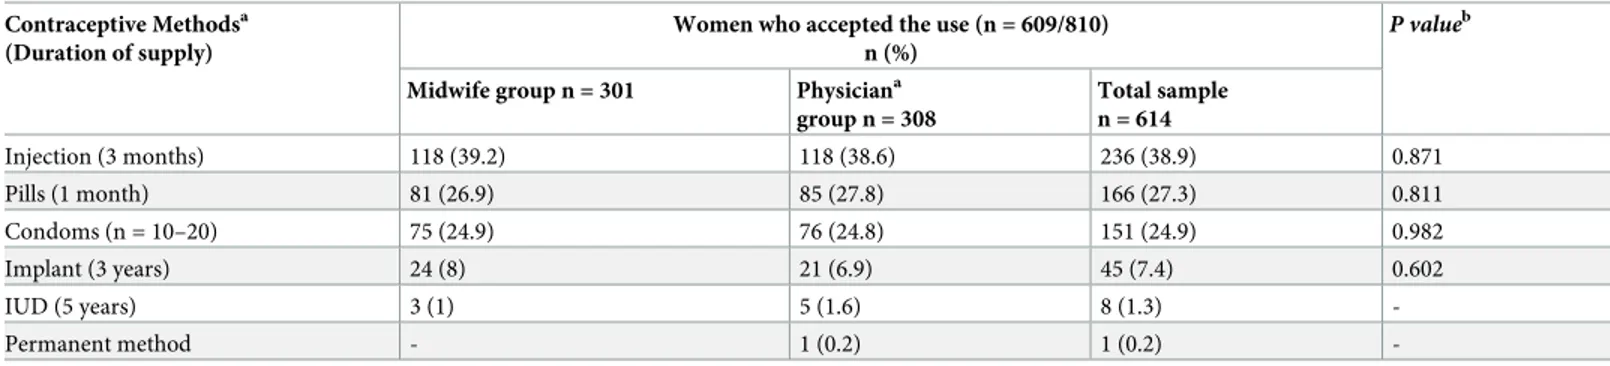 Table 2 shows the distribution of the contraceptive methods chosen, among the 609 women: injections n = 236 (39%); pills n = 166 (27%); condoms n = 151 (25%); implants n = 45/614 (7%) and IUDs n = 8 (1%)